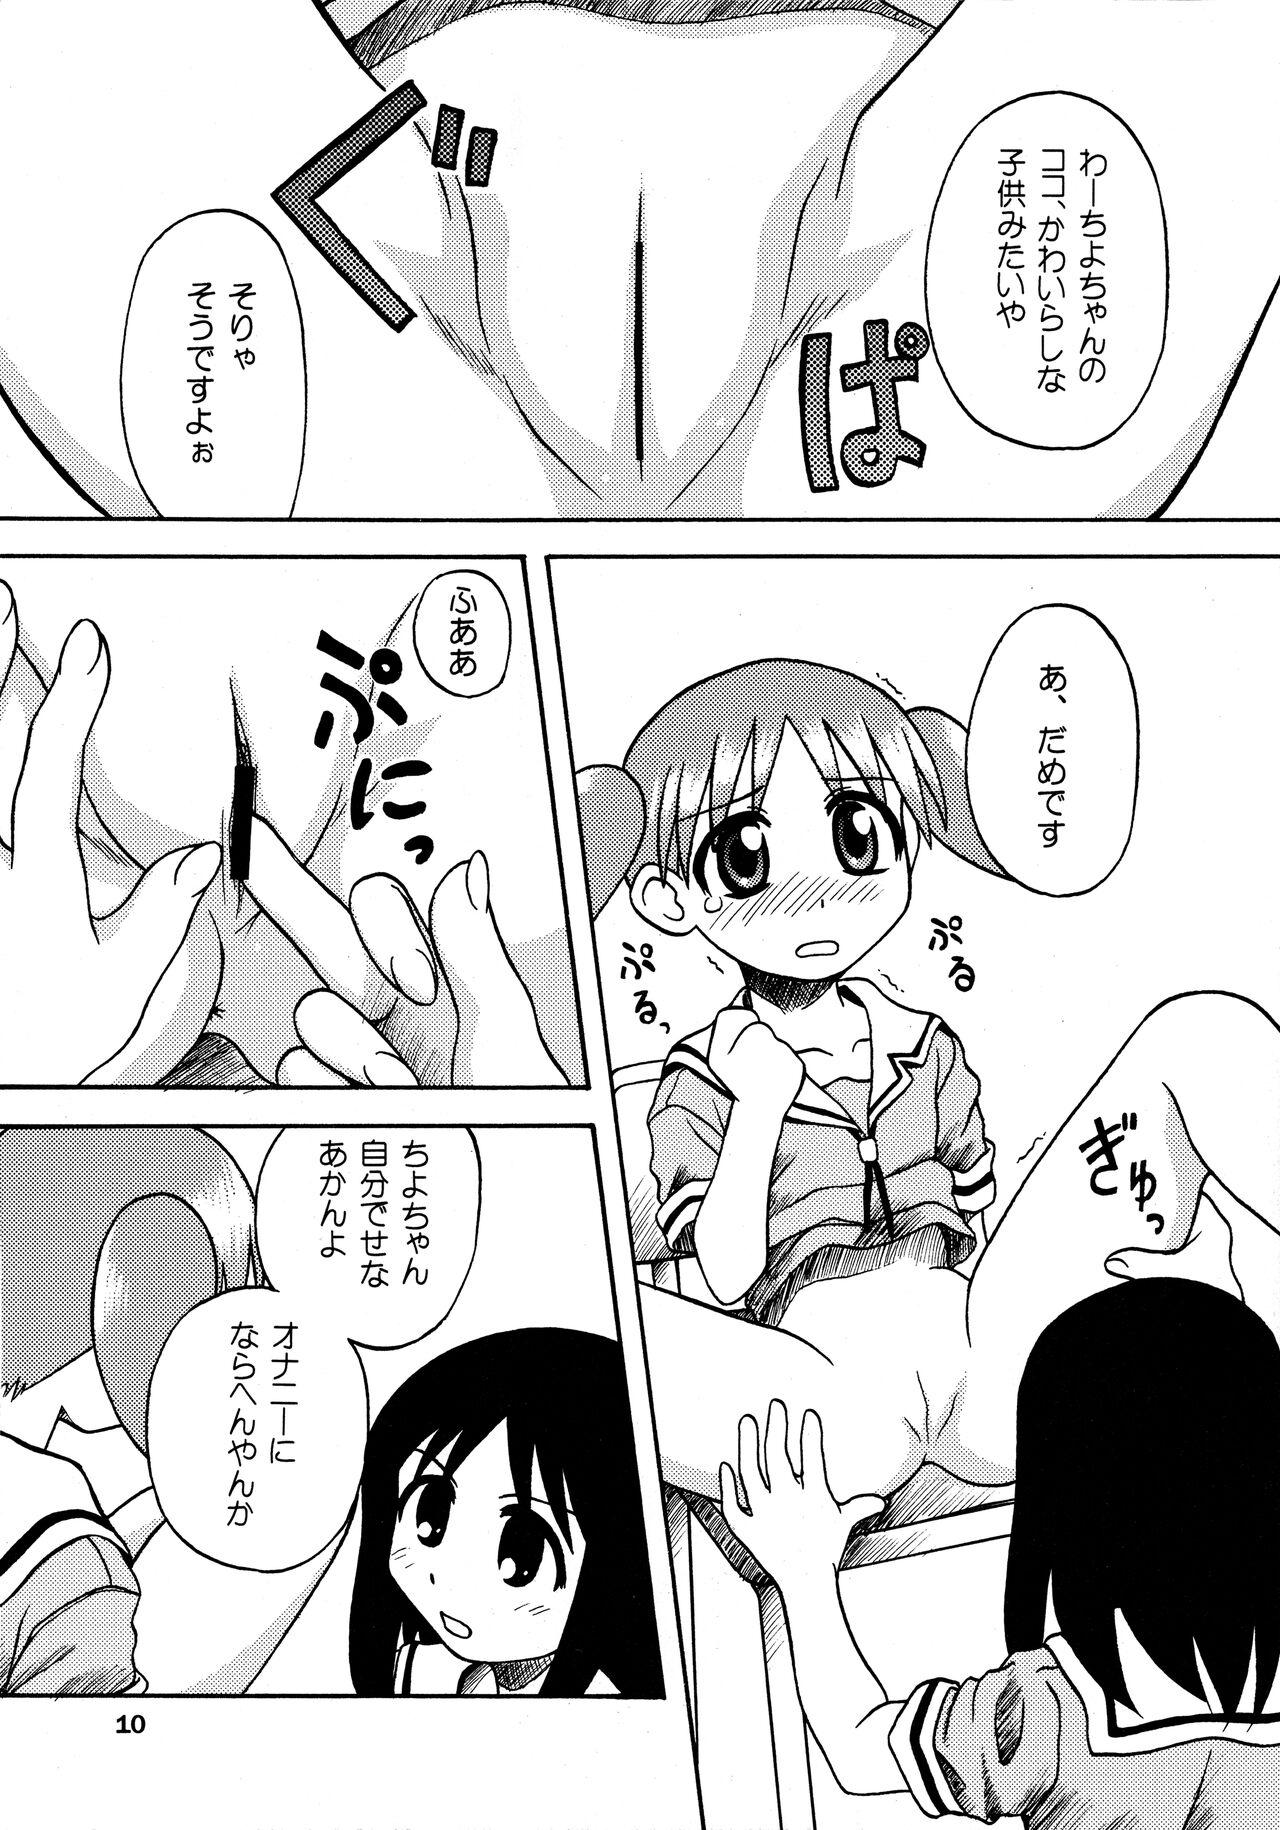 Black Hair ANOTHER LIFE - Azumanga daioh Celebrity Nudes - Page 10